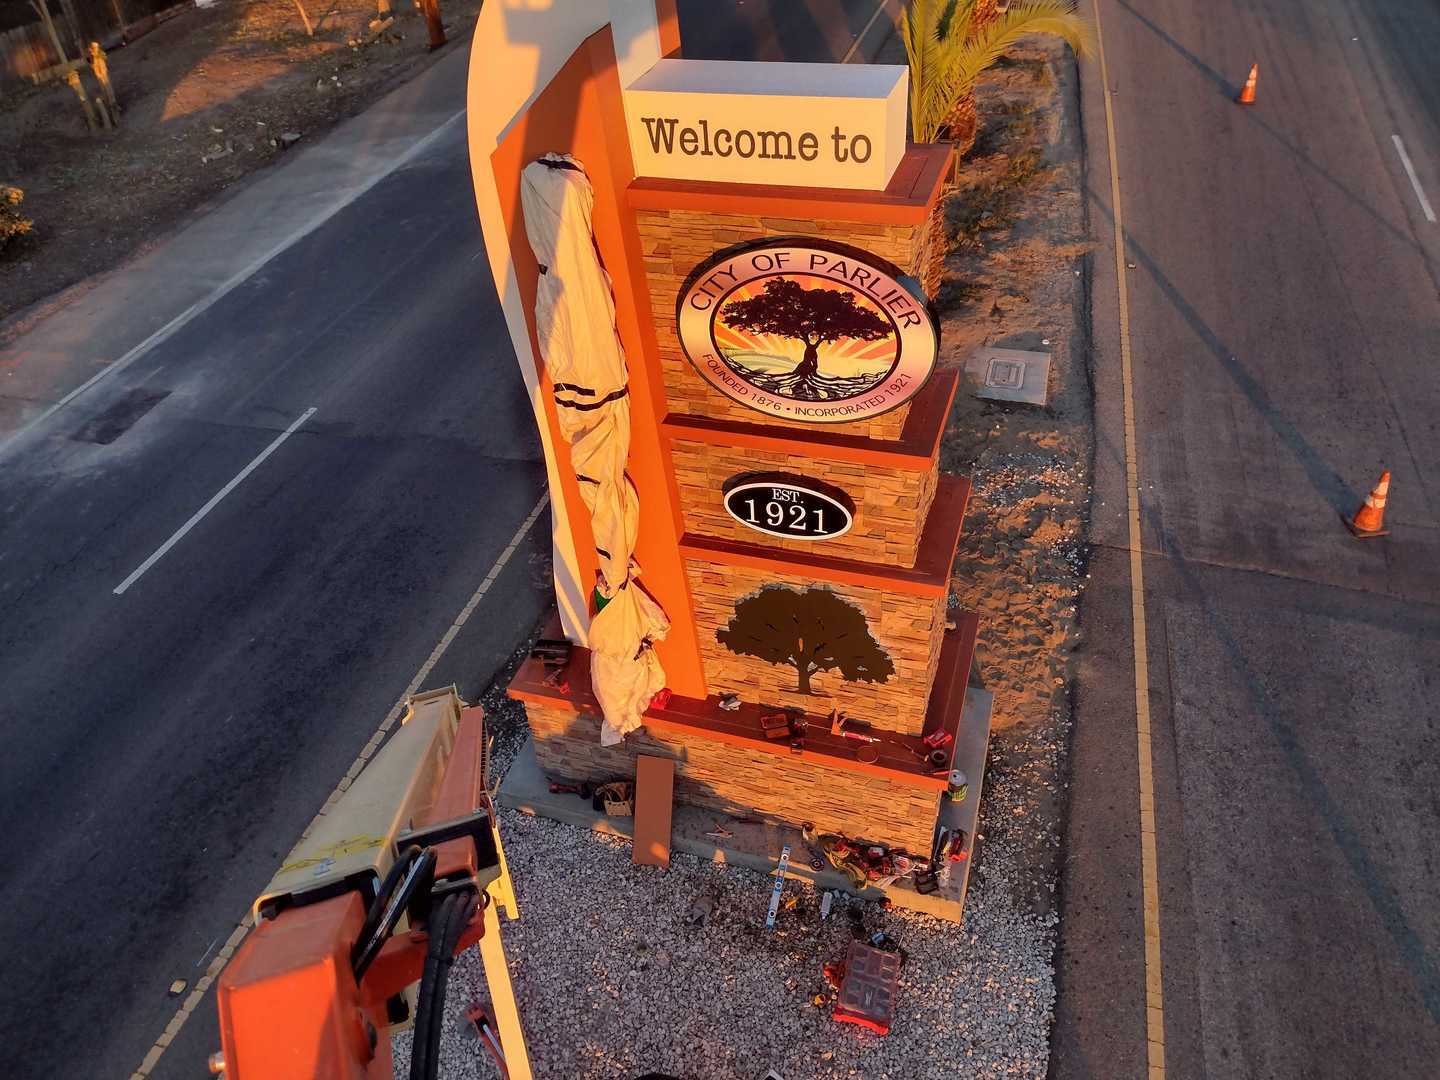 A city welcome sign with Desert Sunrise faux stone.